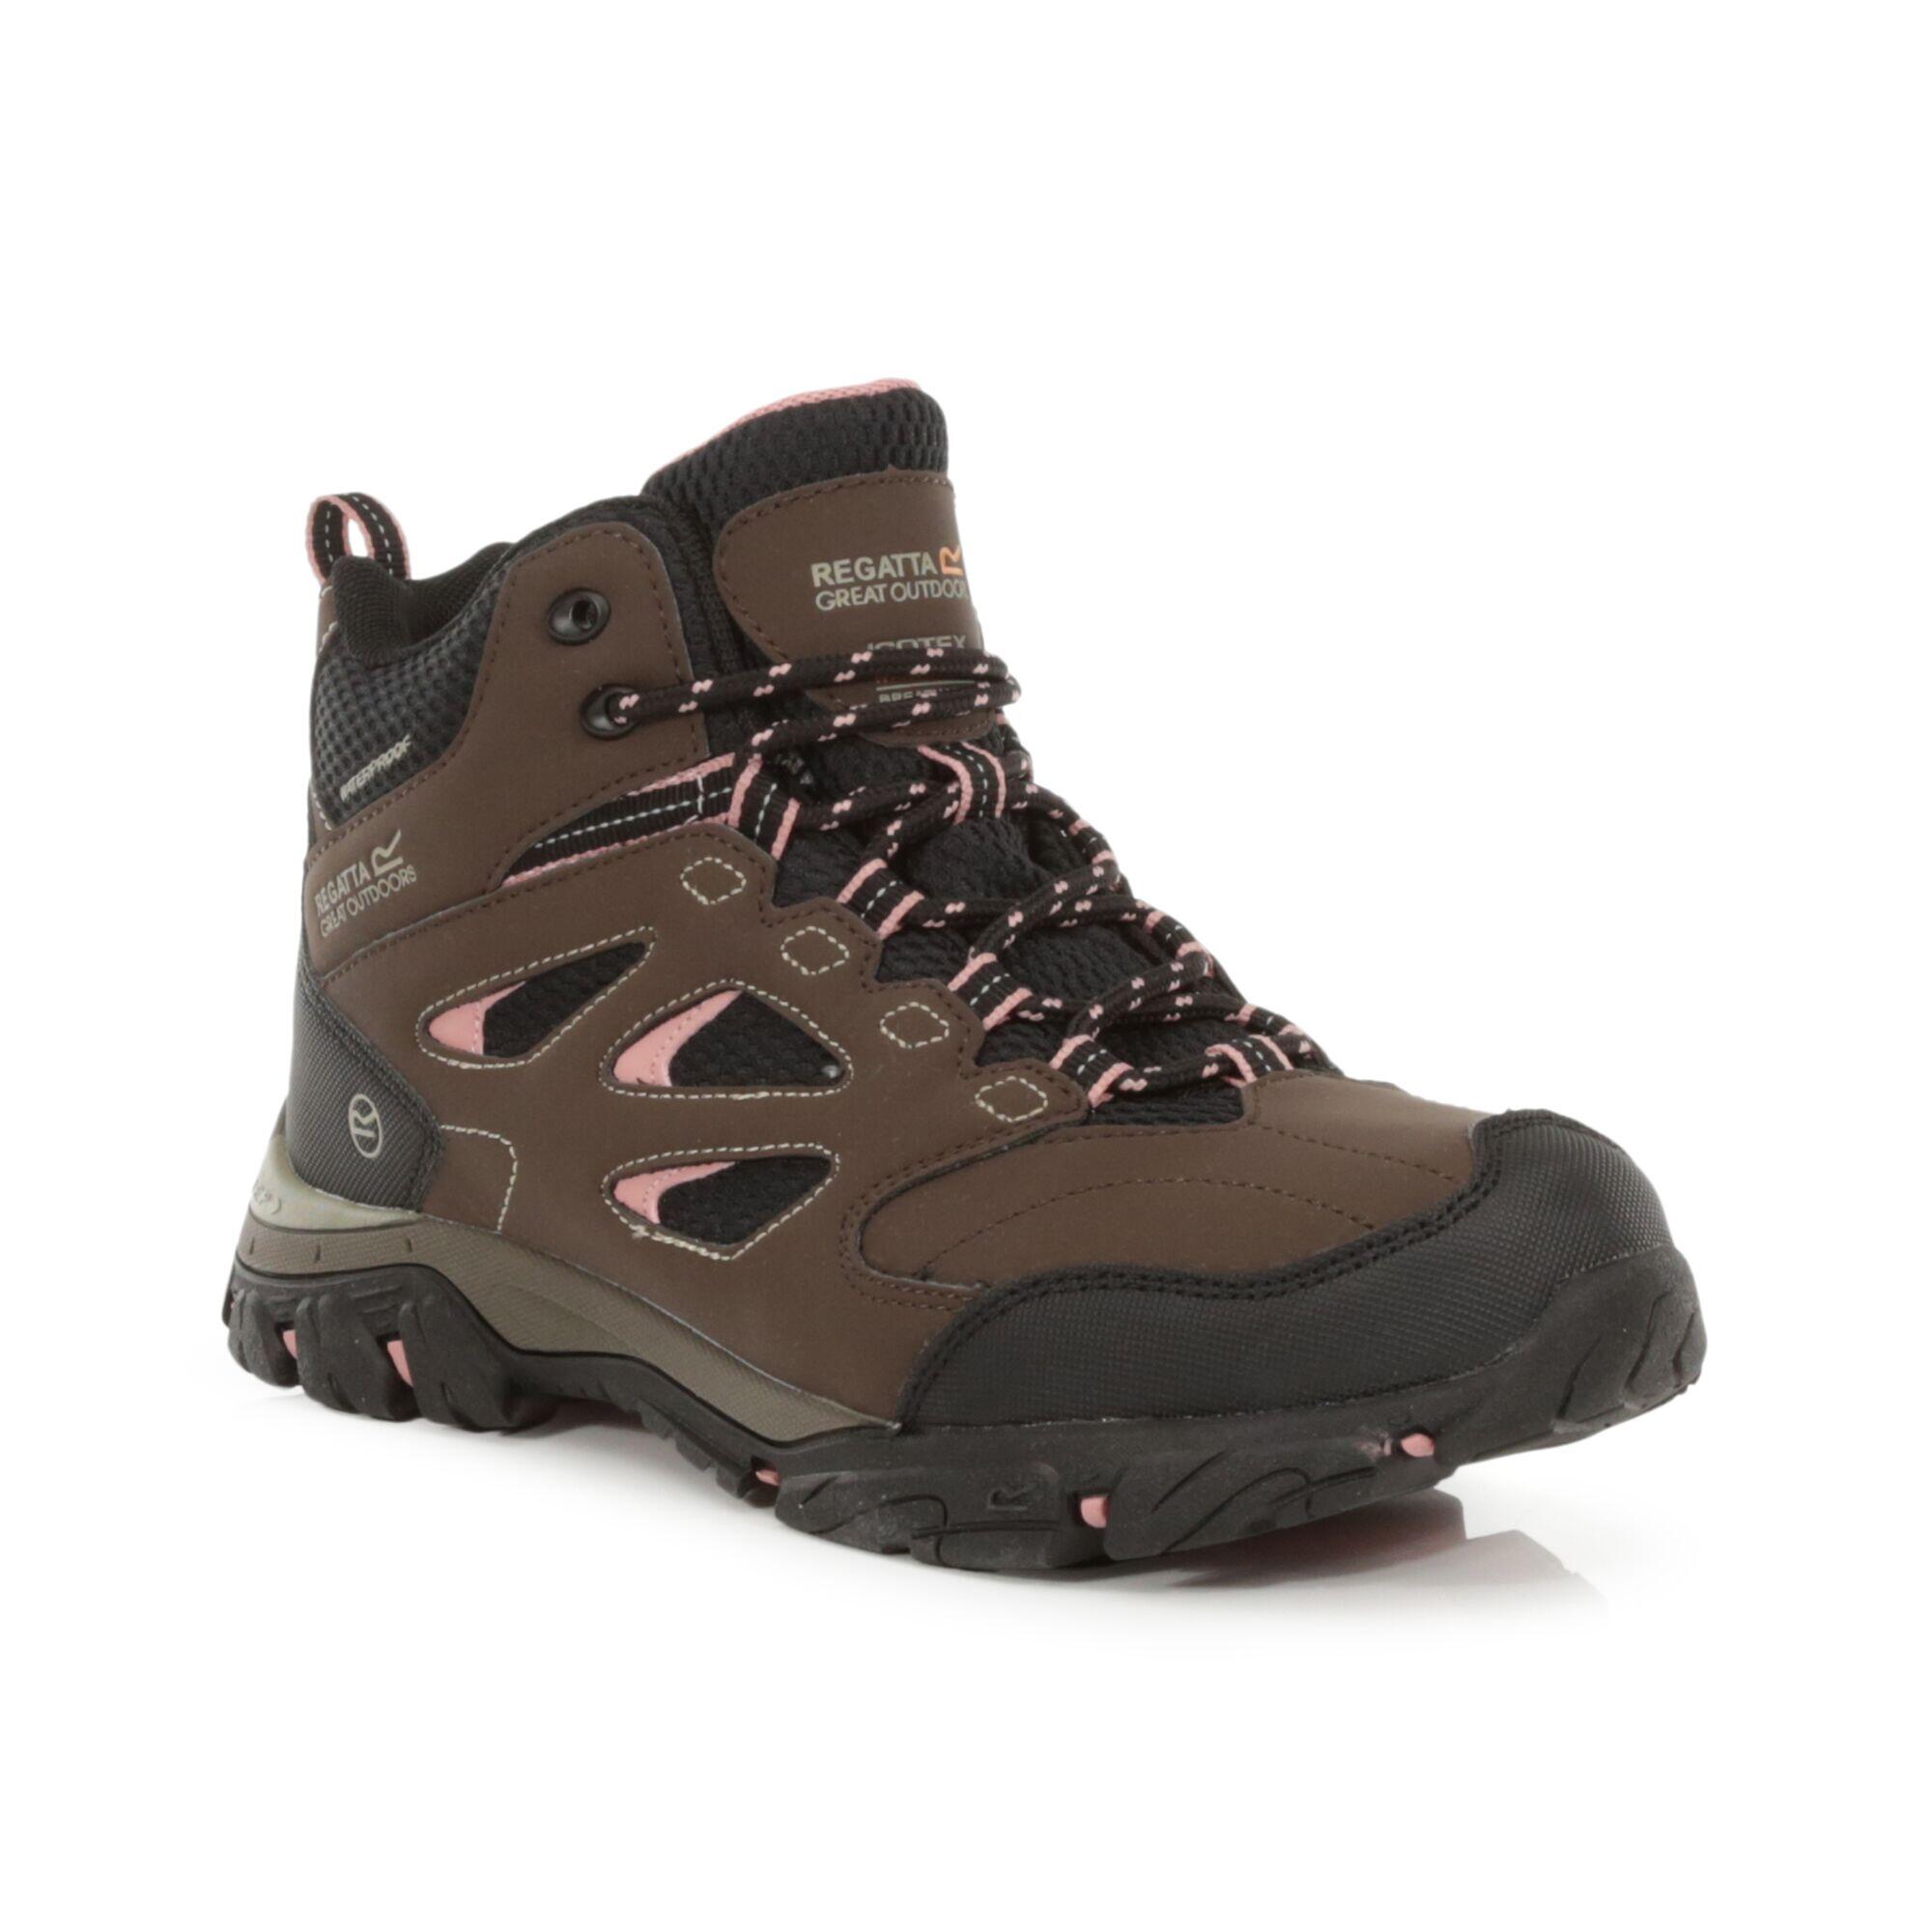 Lady Holcombe IEP Mid Women's Hiking Boots - Chestnut Brown 2/5